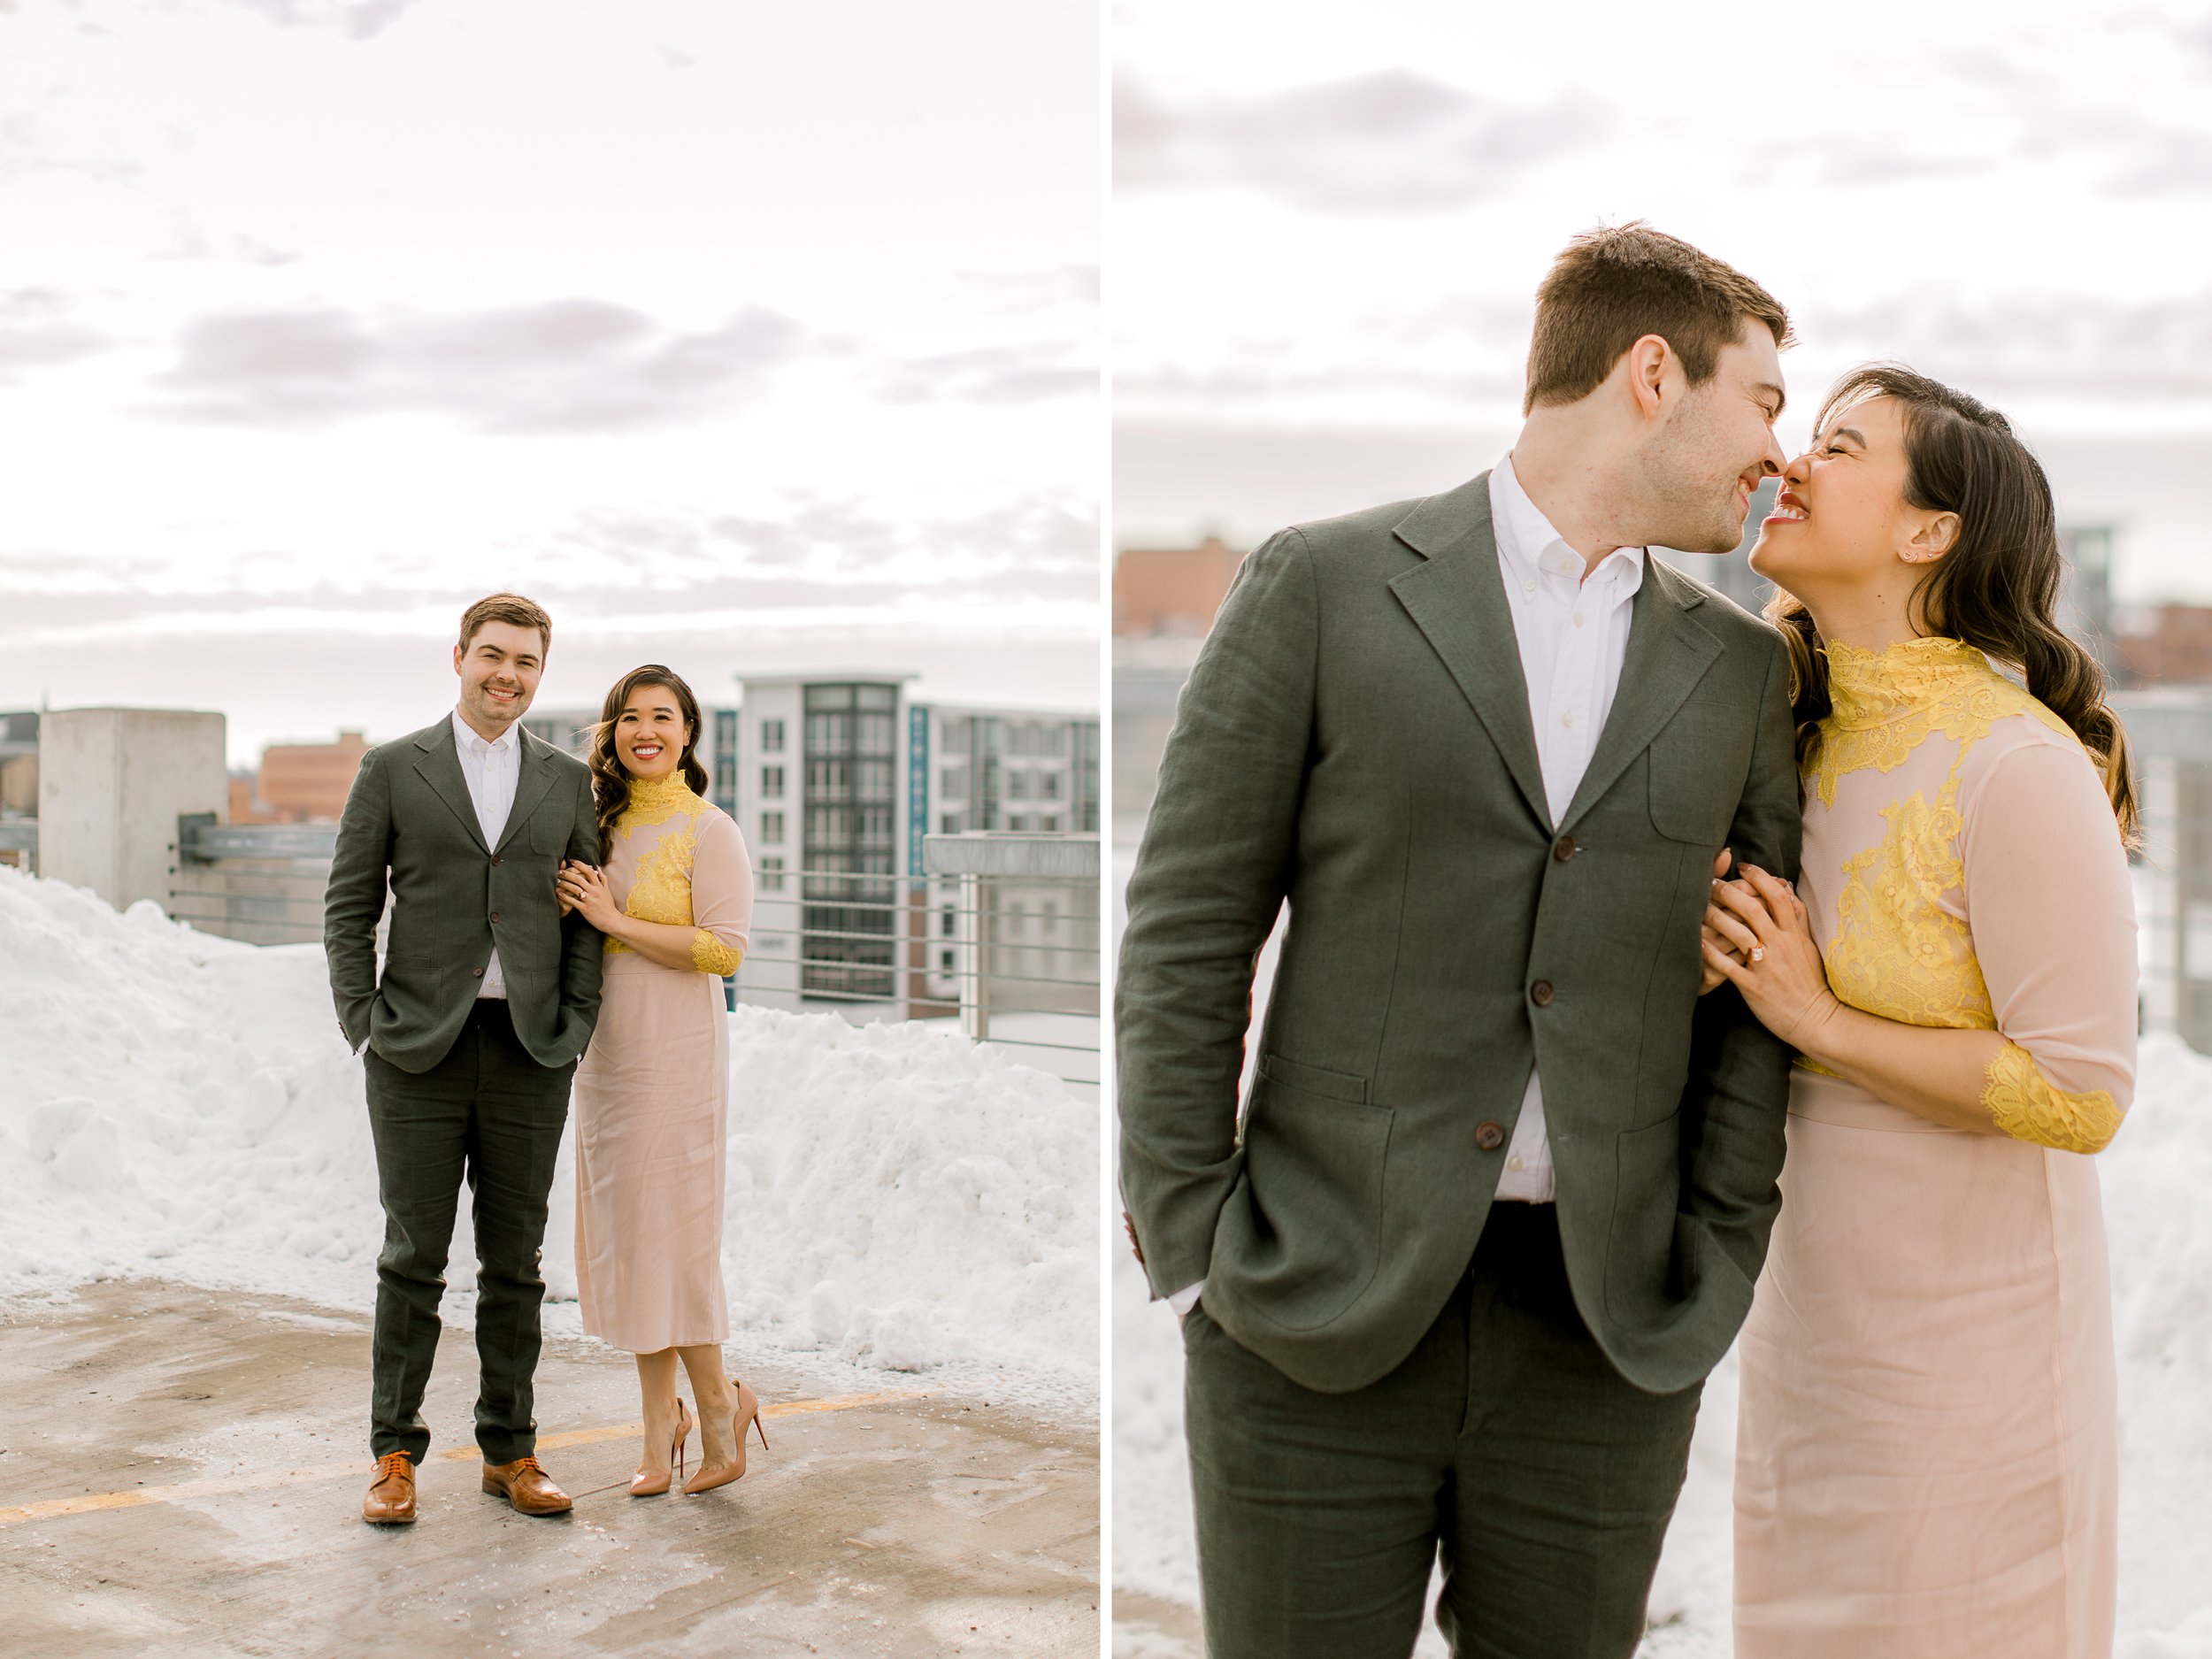 Rock Climbing and Rooftop City Engagement Session | Downtown Grand Rapids | Light and Airy Fine Art Wedding Photography